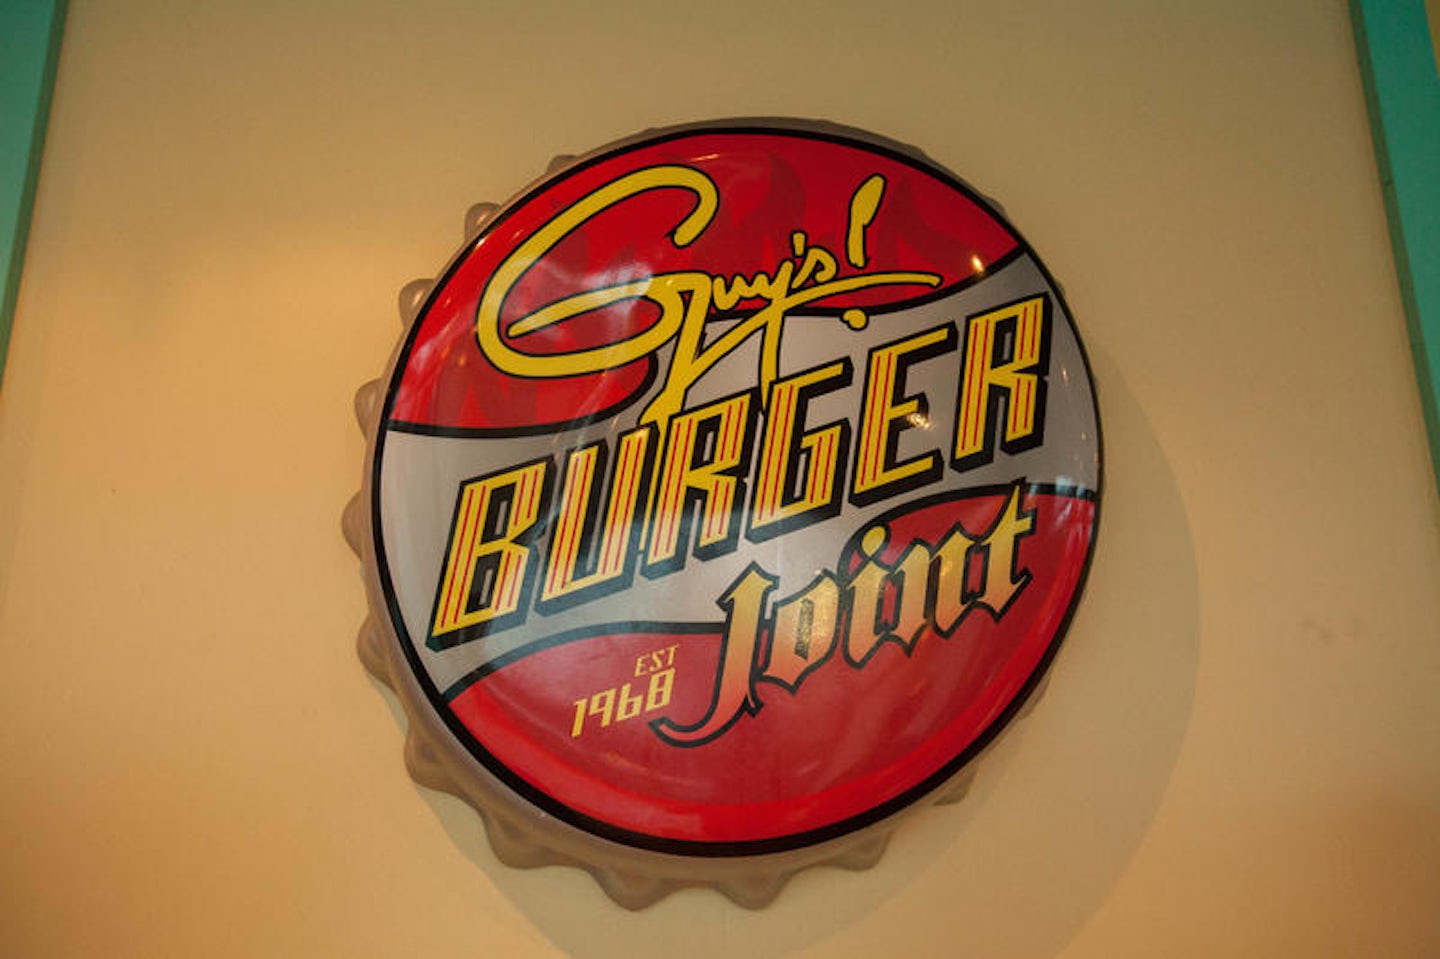 Guy's Burger Joint on Carnival Breeze